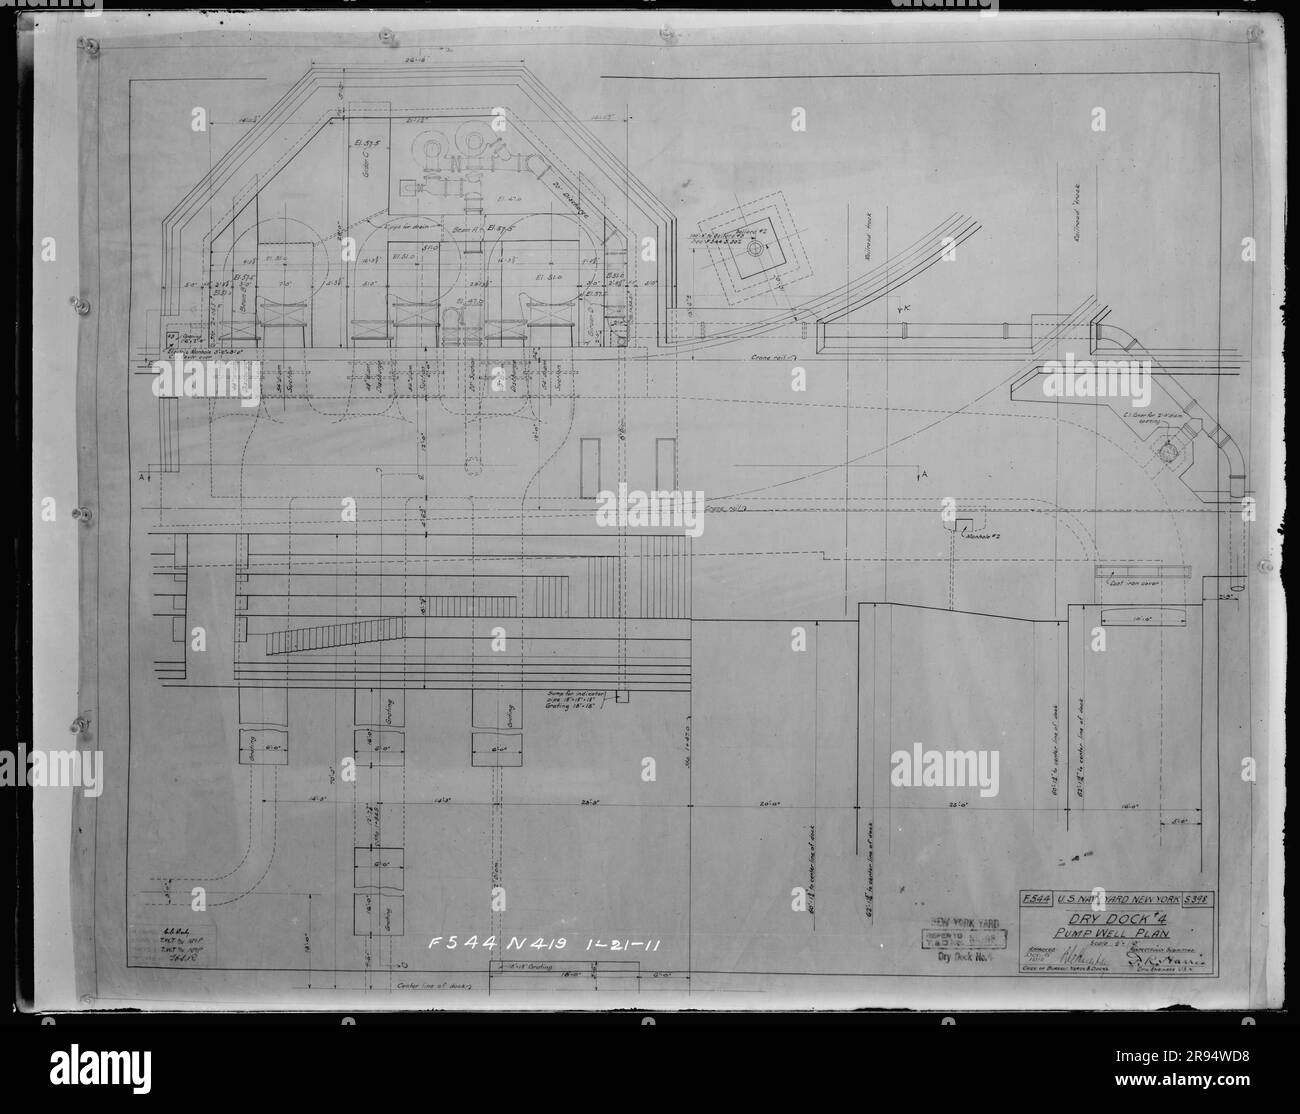 Drawing: Dry Dock Number Pump Well Plan. Glass Plate Negatives of the Construction and Repair of Buildings, Facilities, and Vessels at the New York Navy Yard. Stock Photo